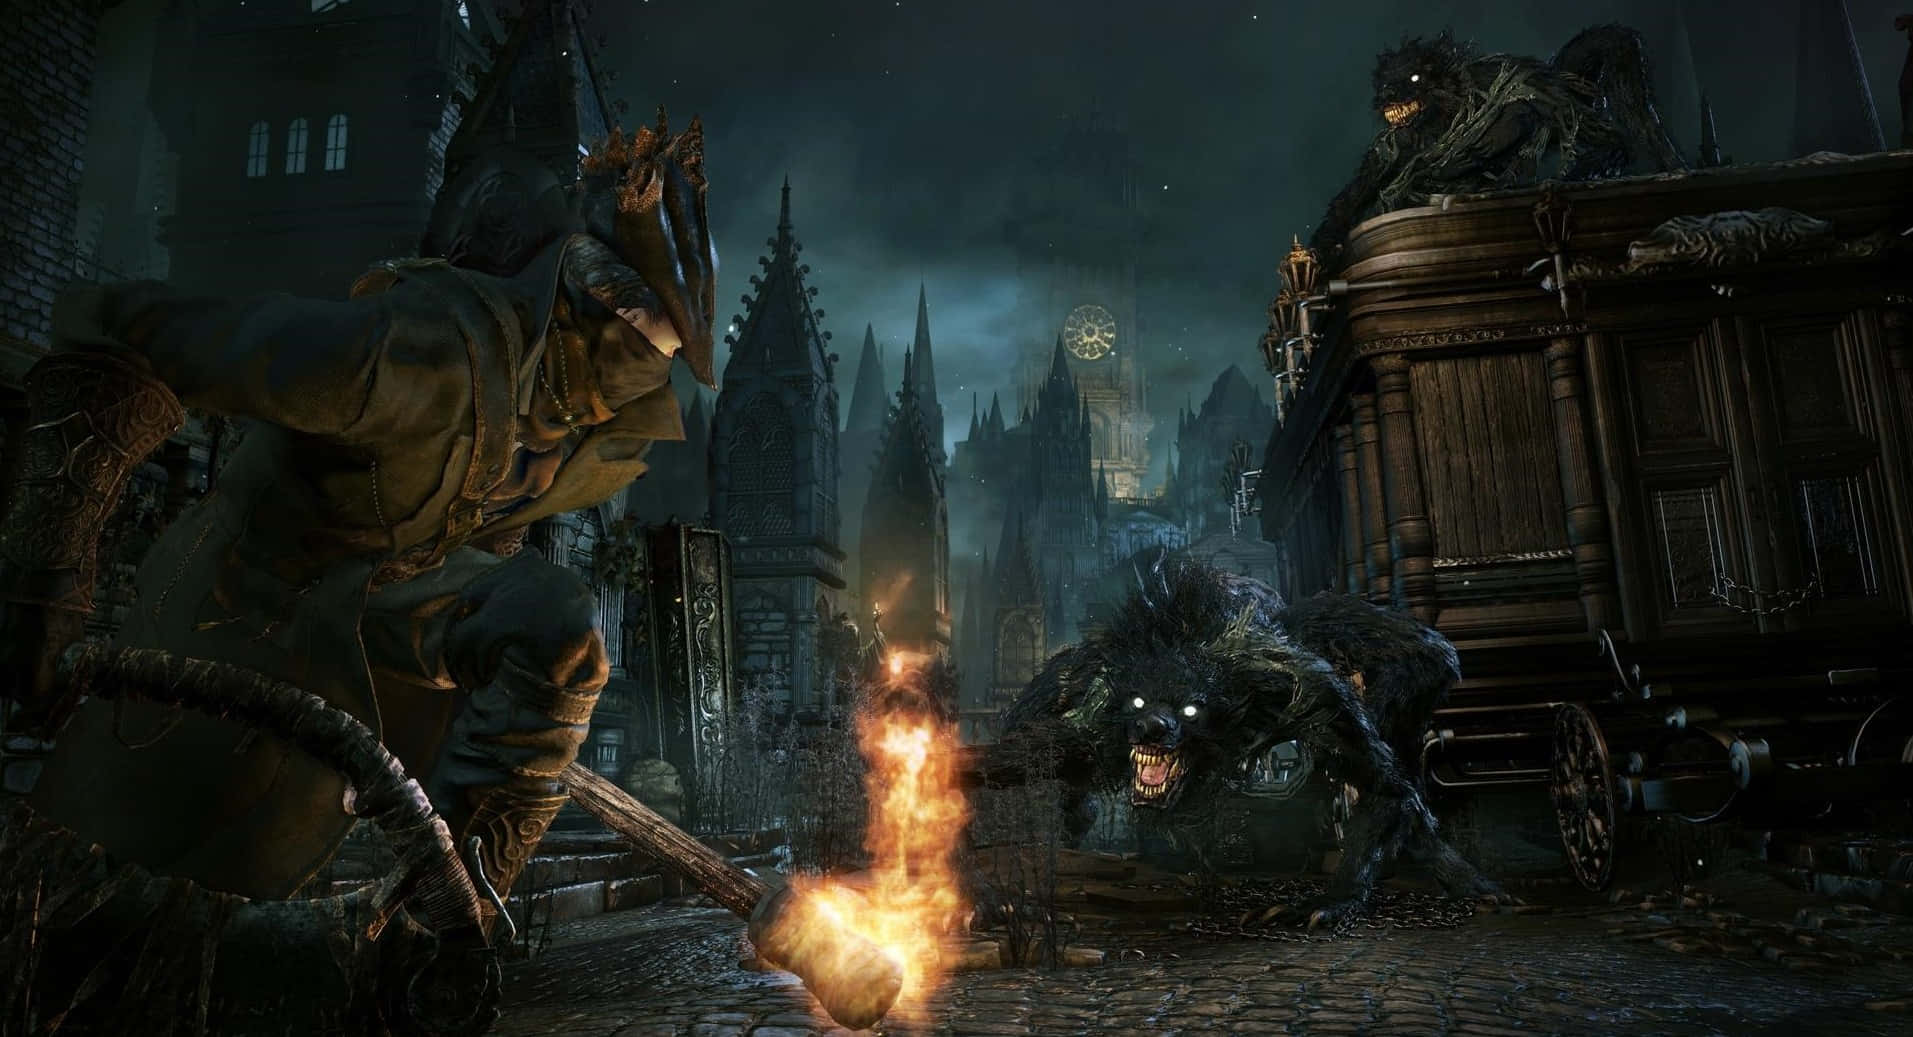 Caption: Hunter facing the beasts in the Gothic city of Yharnam